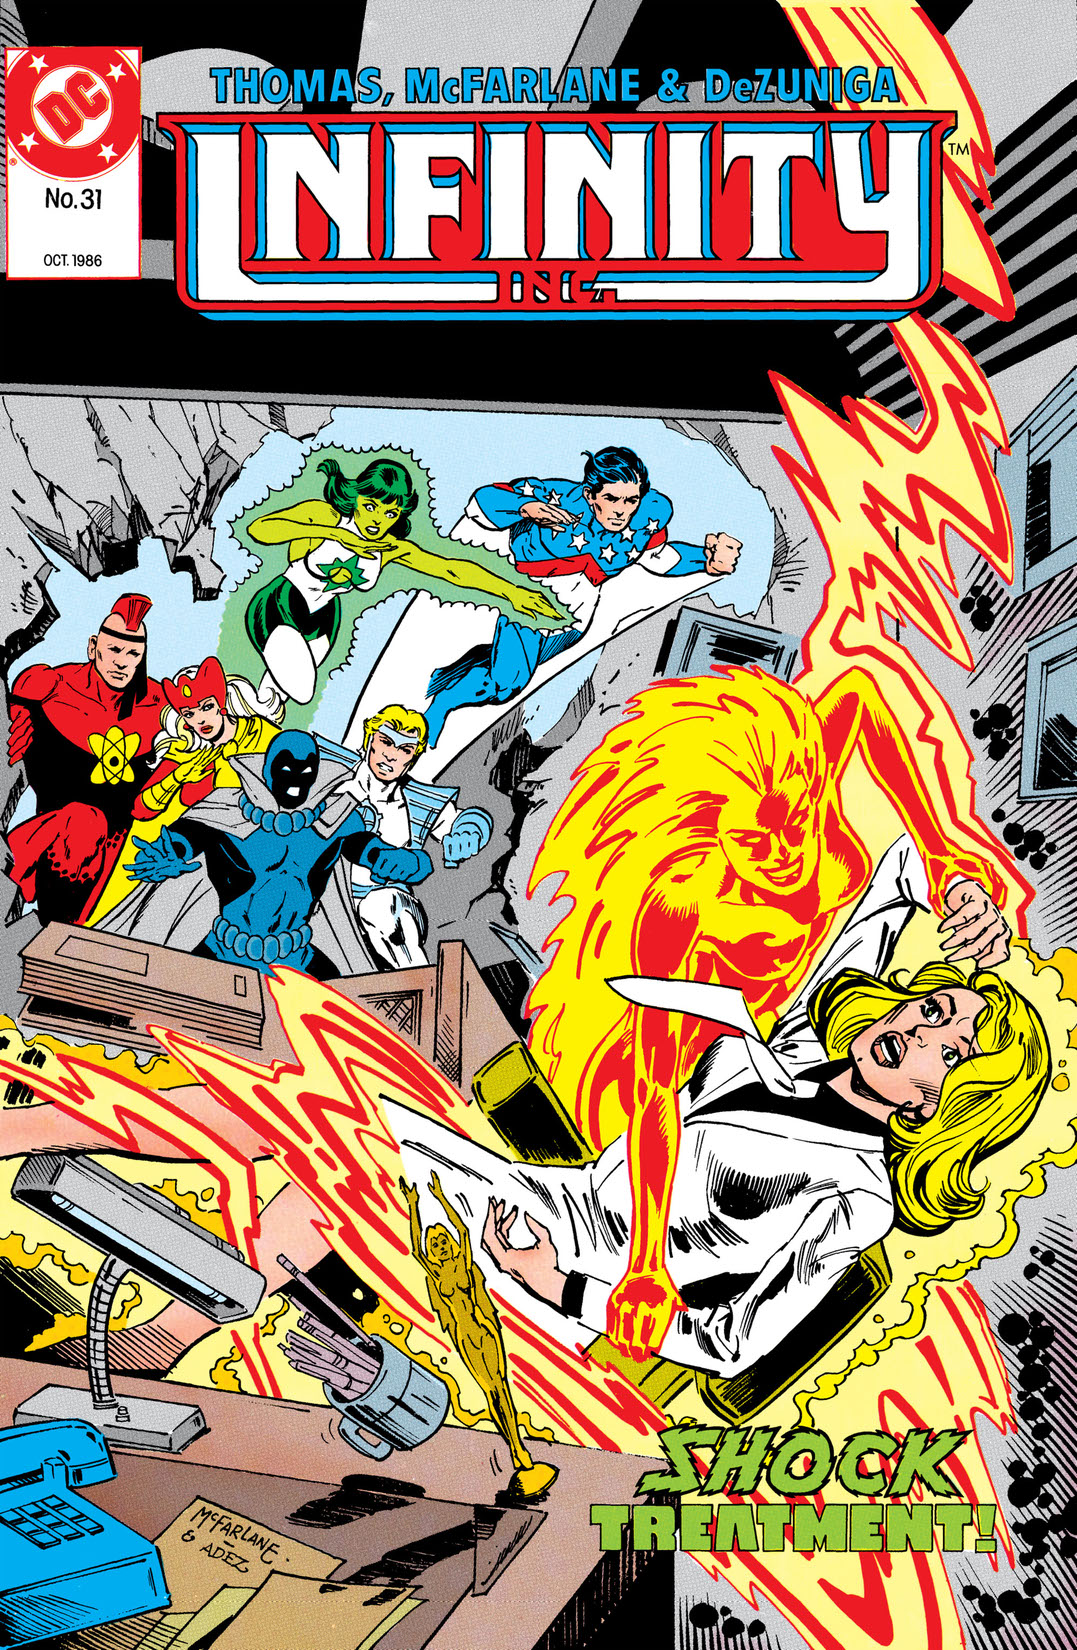 Infinity, Inc. (1984-) #31 preview images